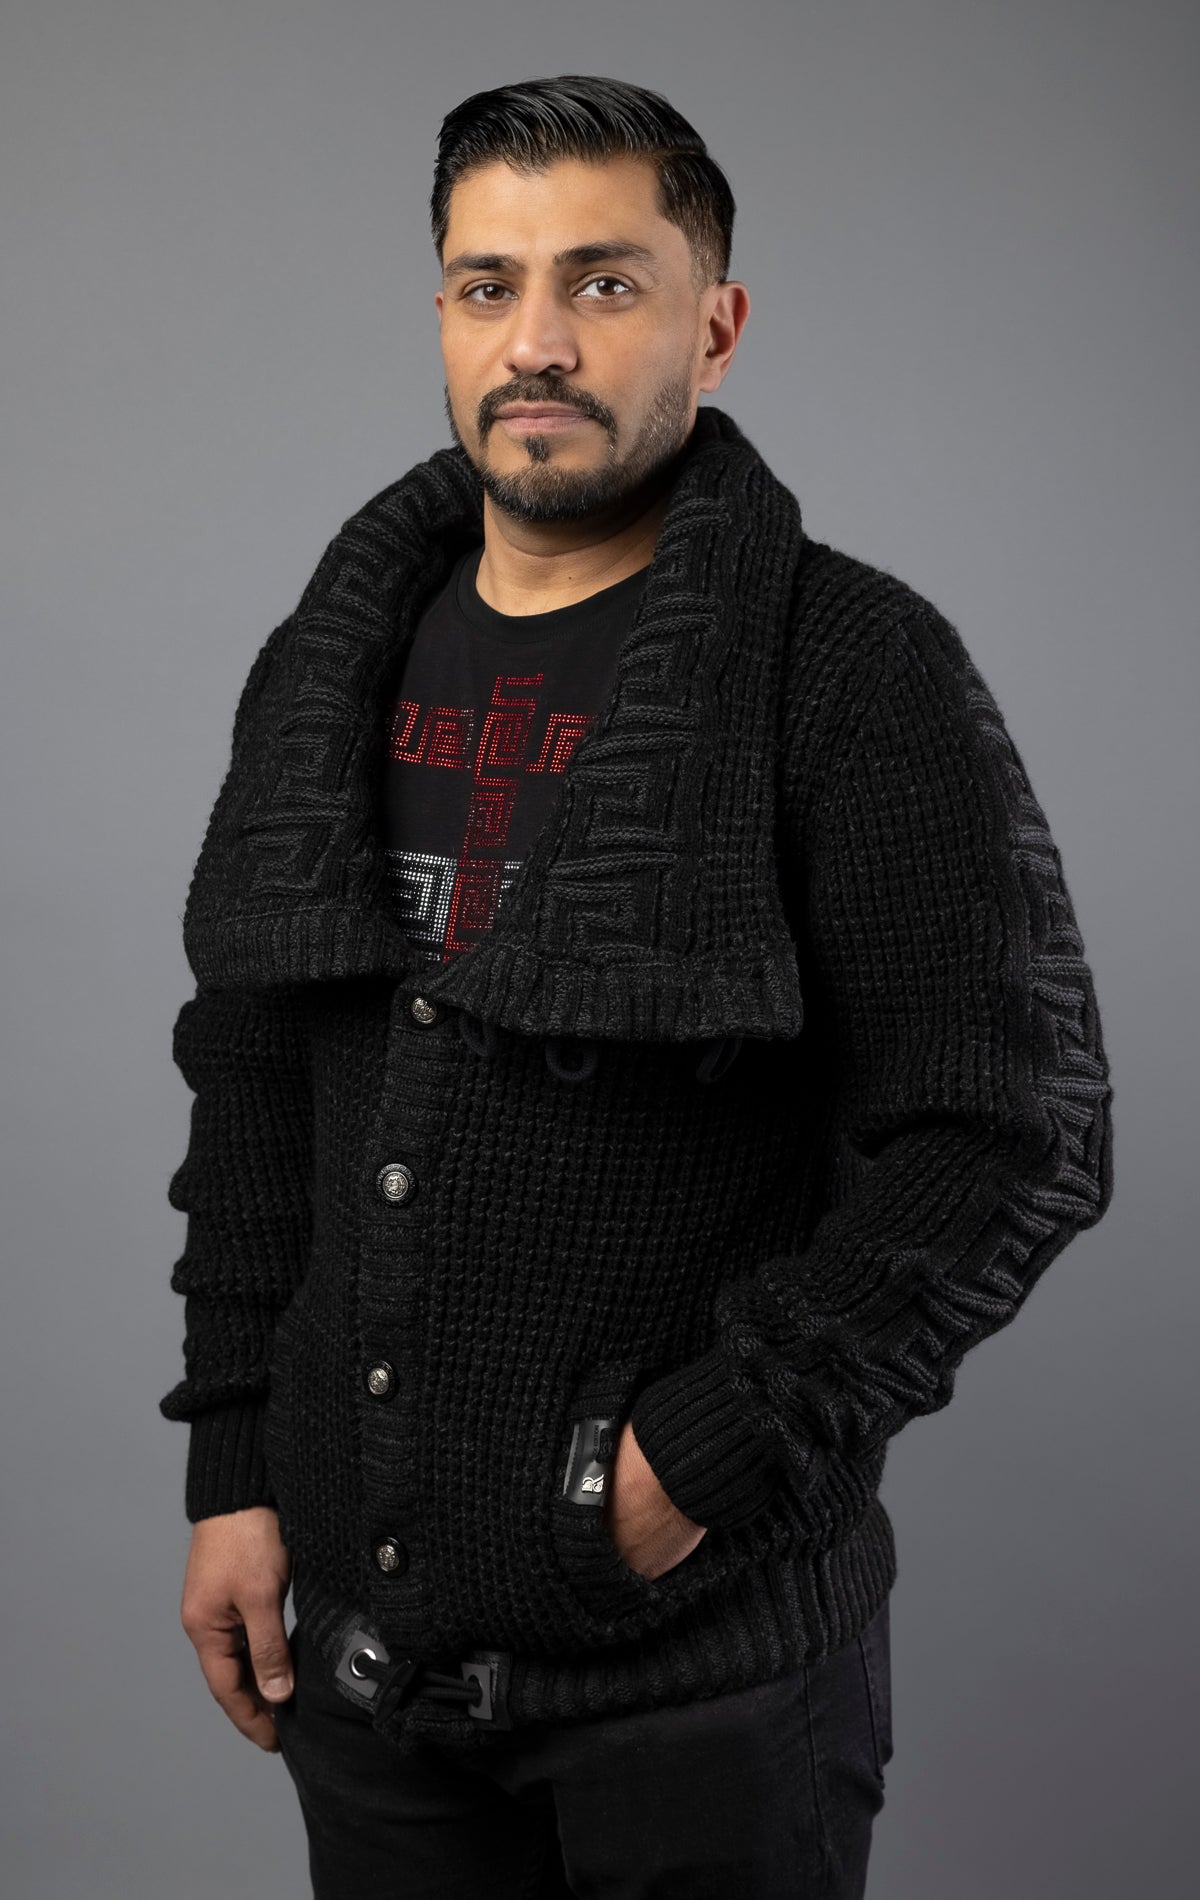 Man wearing heavy-weight, high quality sweater in black color. Designed with a slightly slim fit